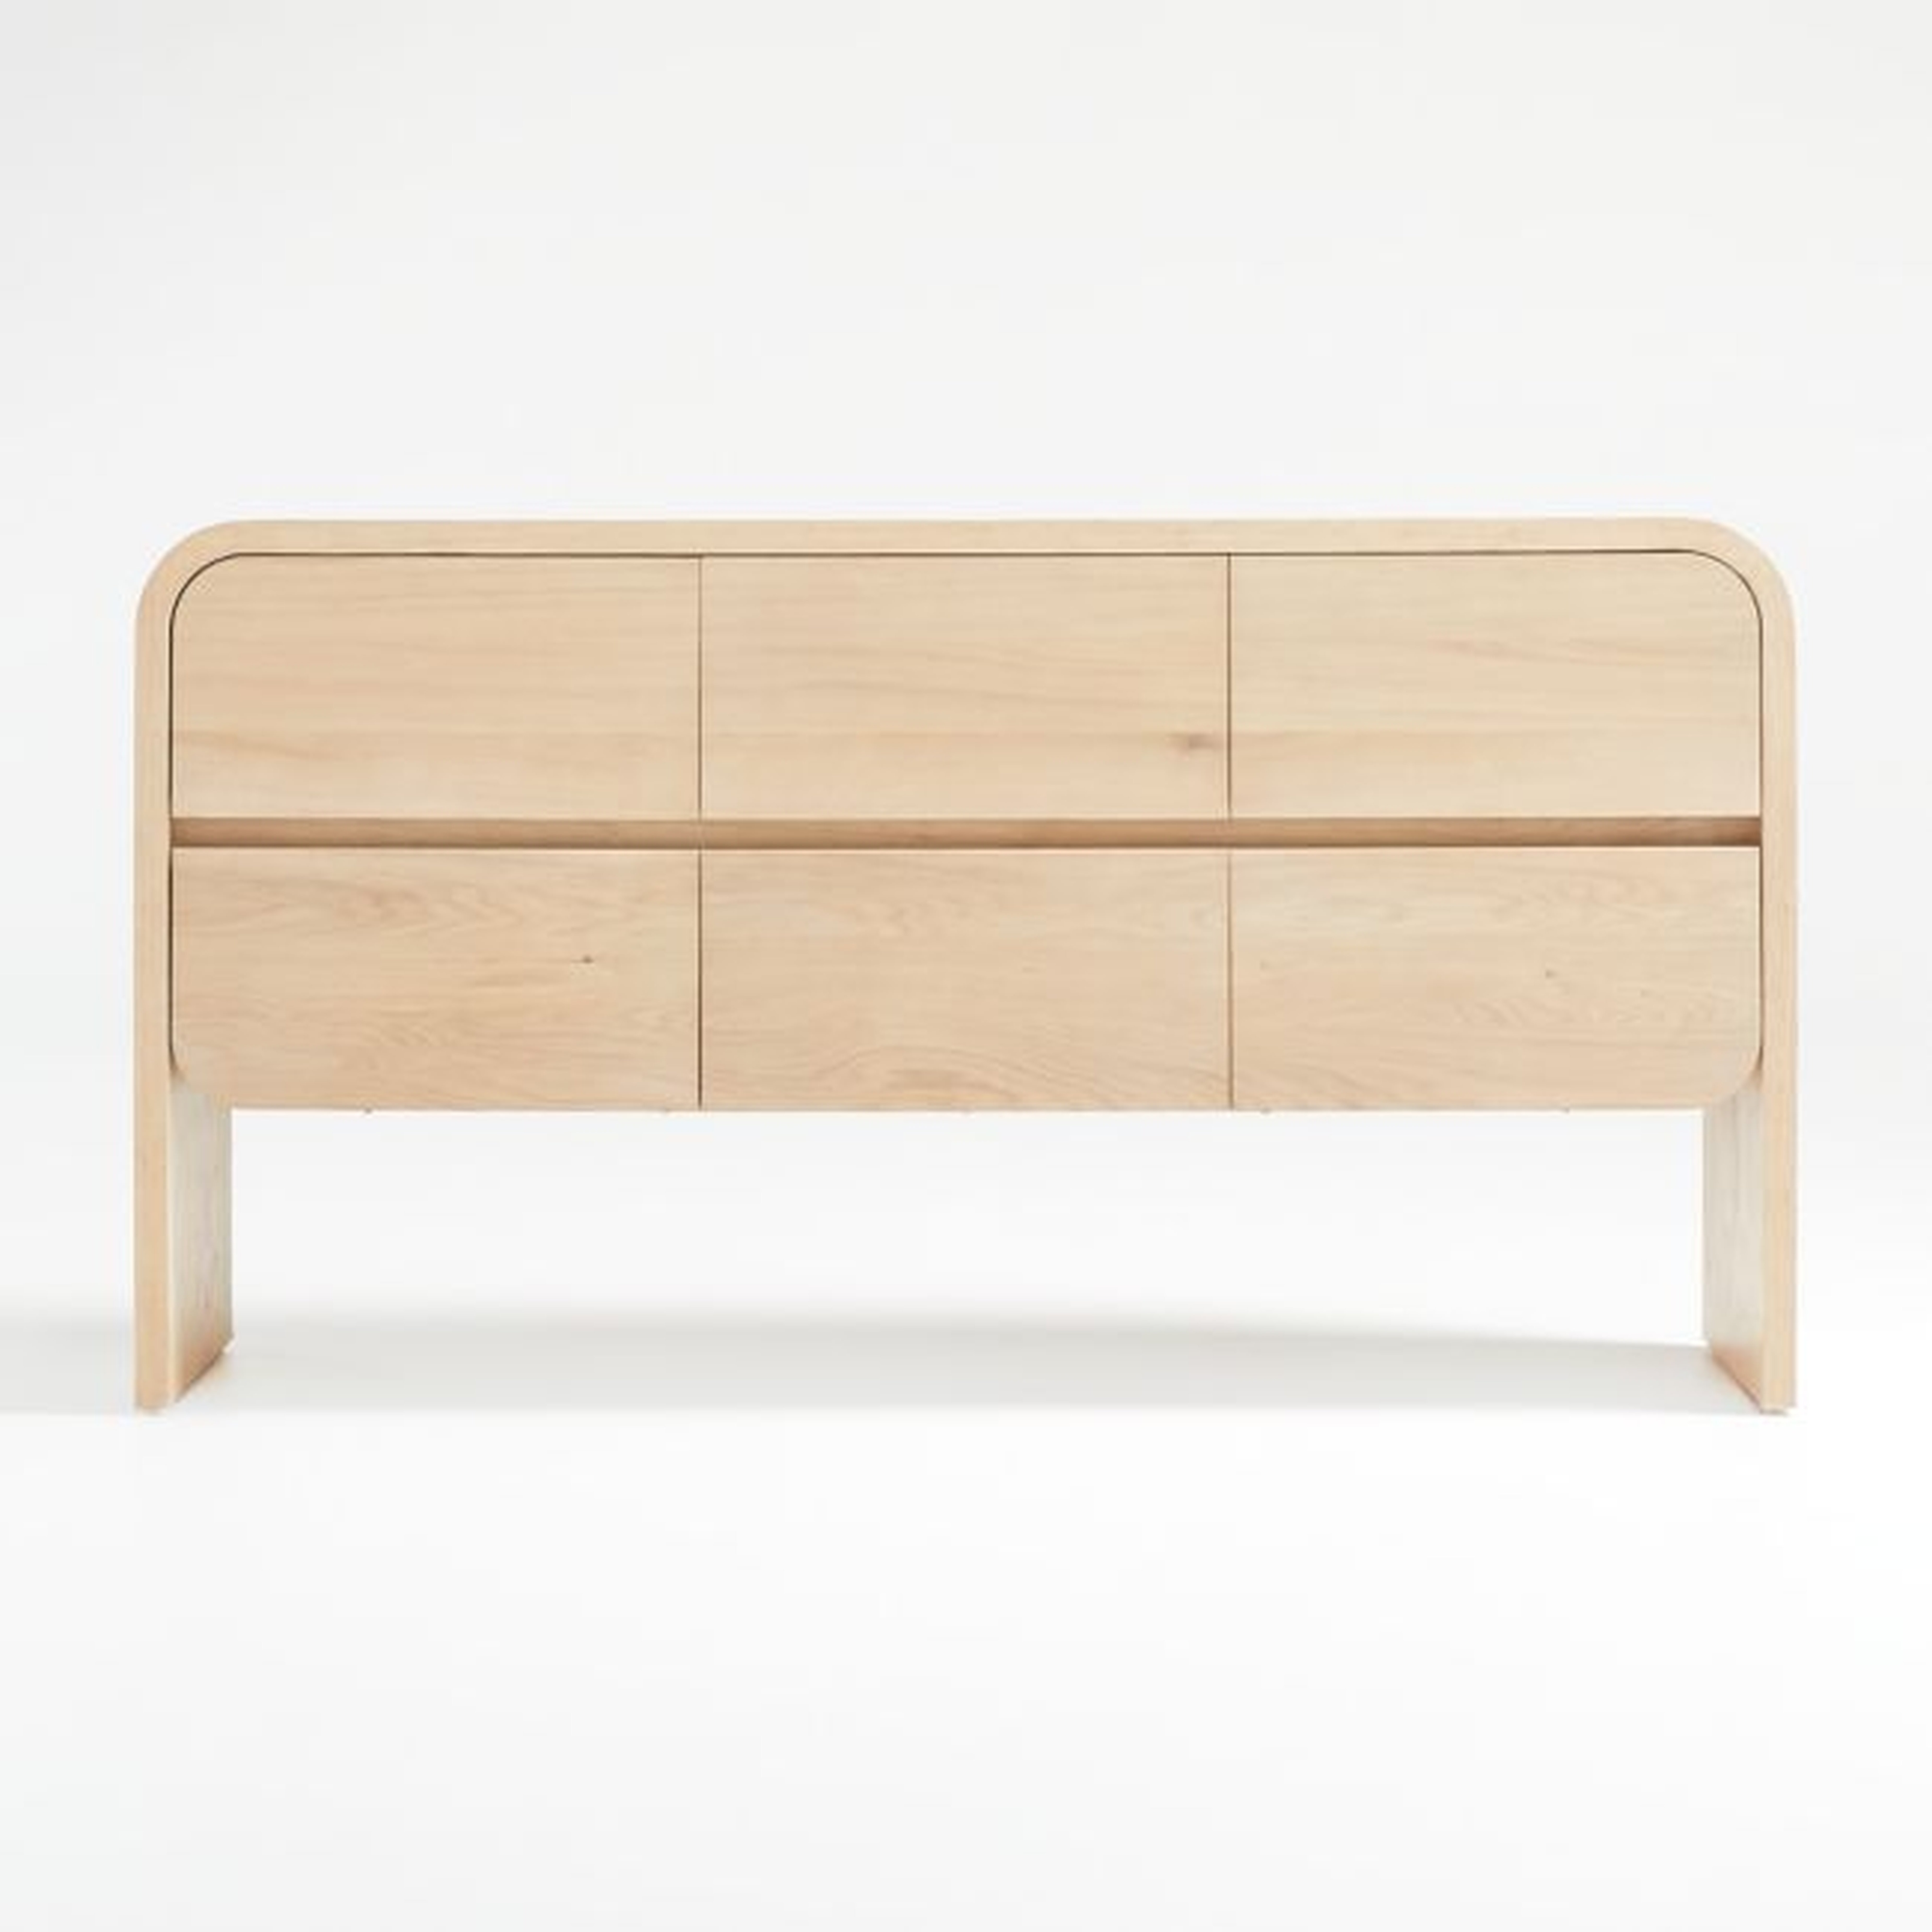 Cortez Natural Floating Dresser by Leanne Ford - Crate and Barrel